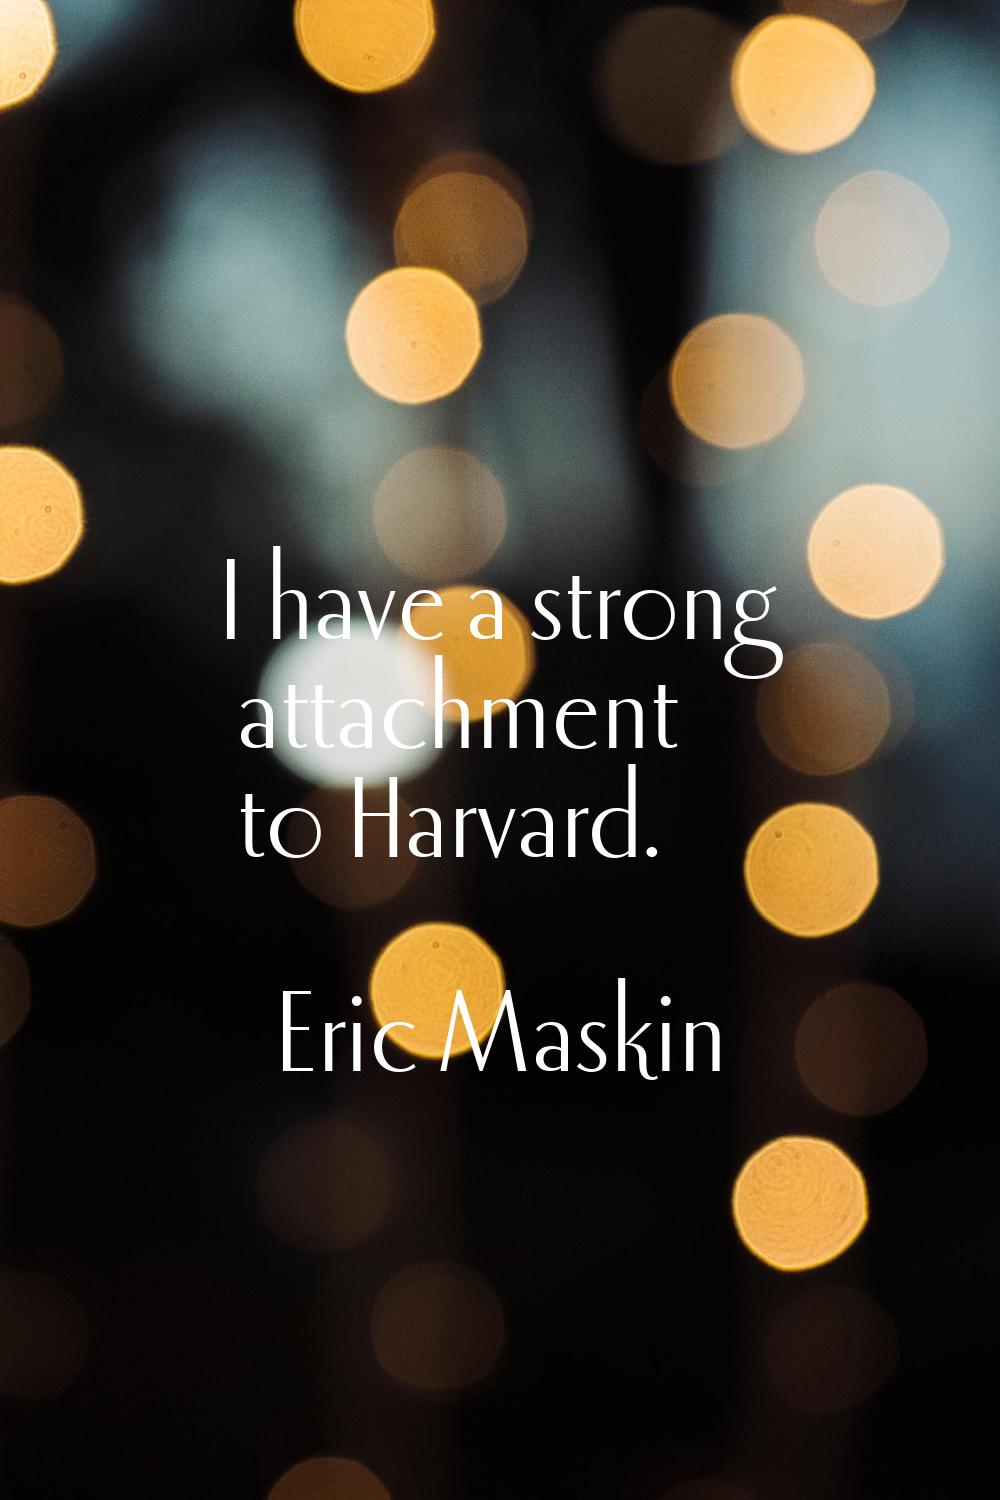 I have a strong attachment to Harvard.